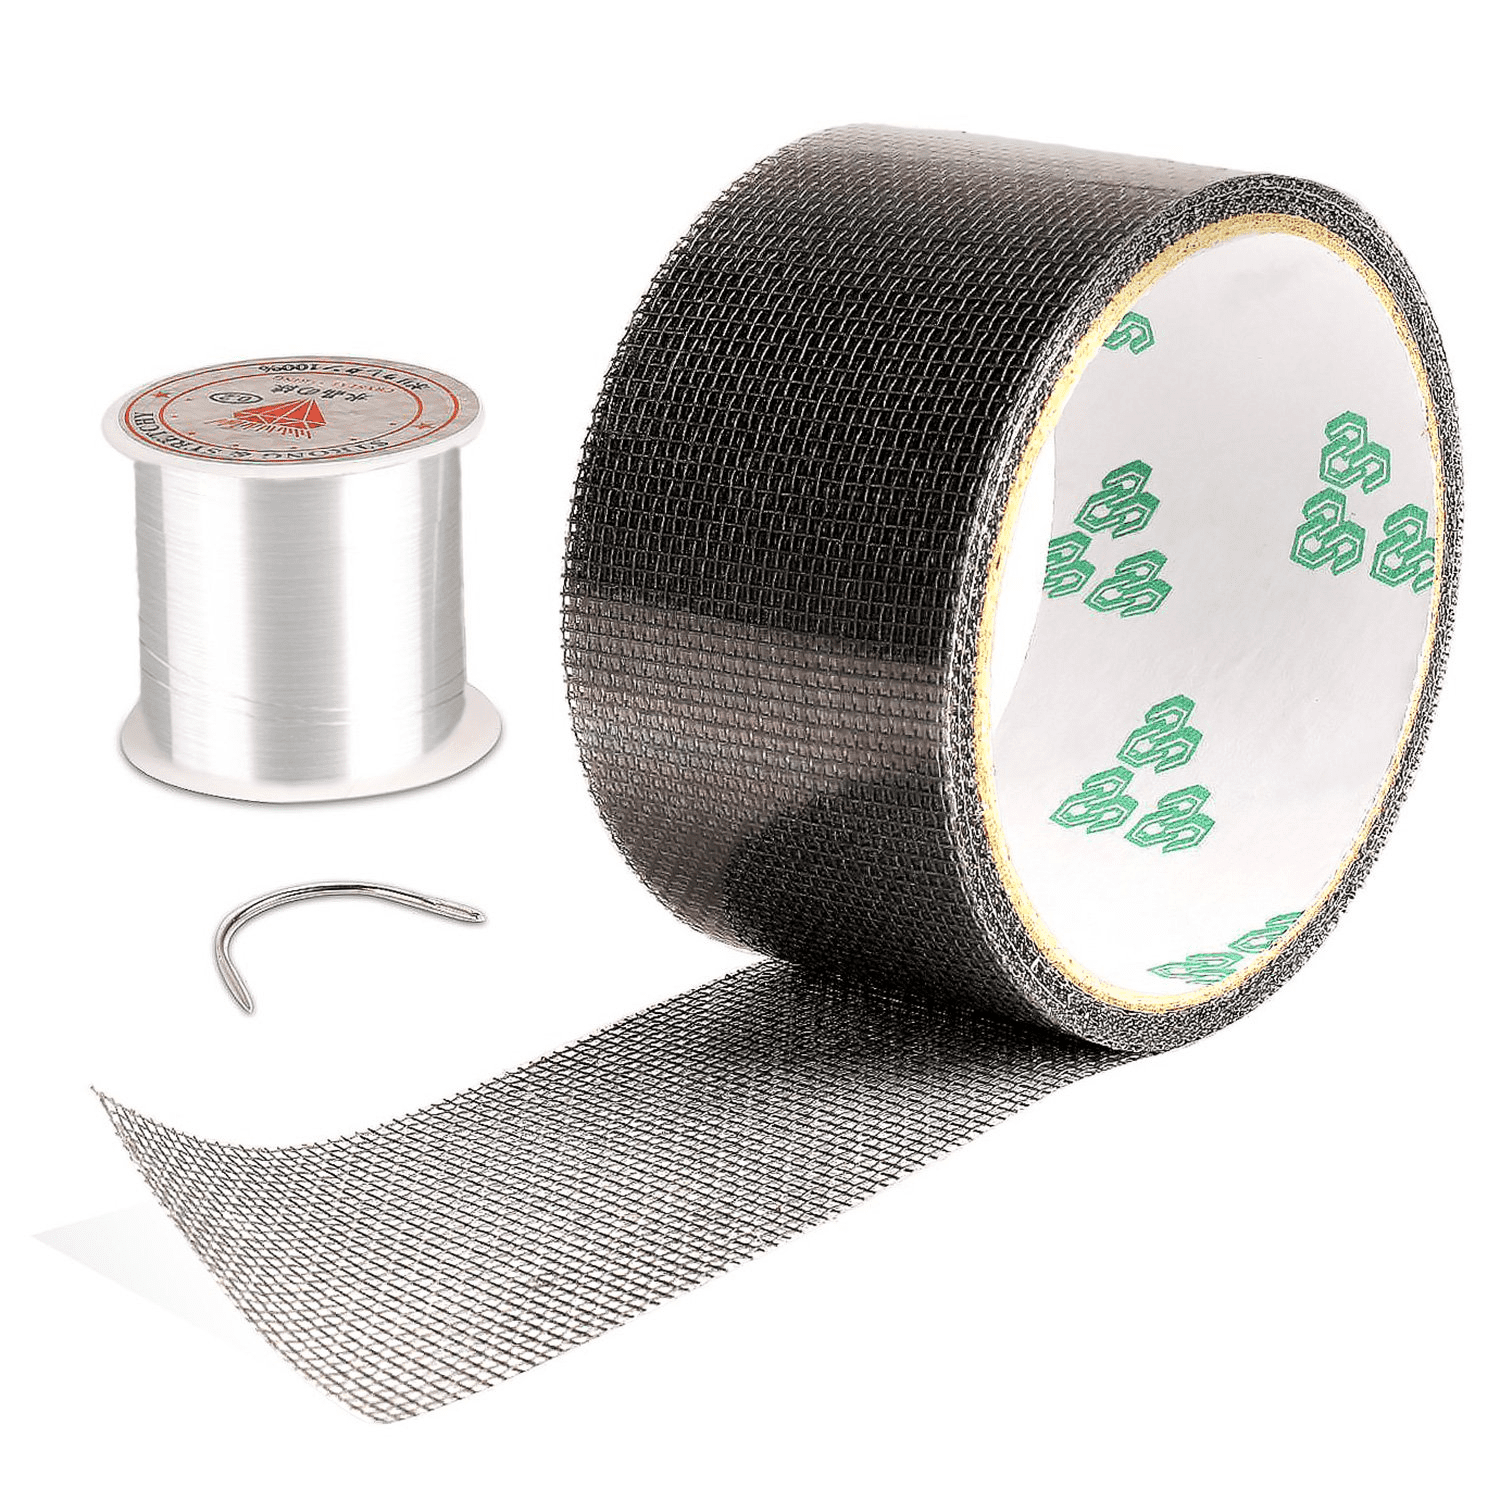 5 x 200 cm/ 2 x 78.7Inch Strong Adhesive Fiberglass Covering Wire Mesh Repair Patch Tool for Window Screen and Screen Door Tears Holes Screen Repair Mecmbj 2 Rolls Window Screen Repair Kit Tape